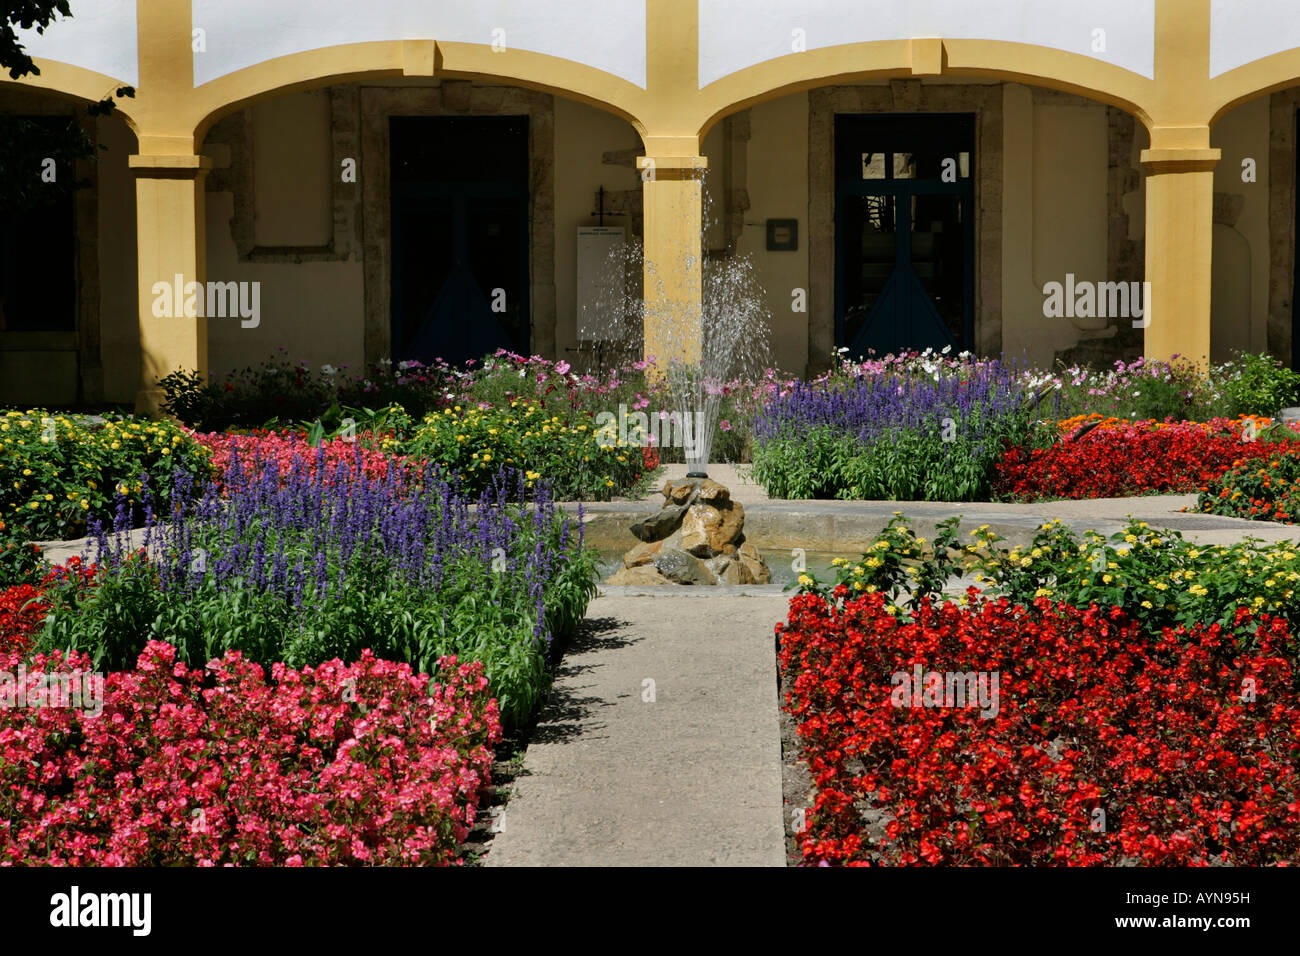 Gardens of the Espace Van Gogh, the former hospital where Van Gogh was a patient, Arles, Provence, France Stock Photo